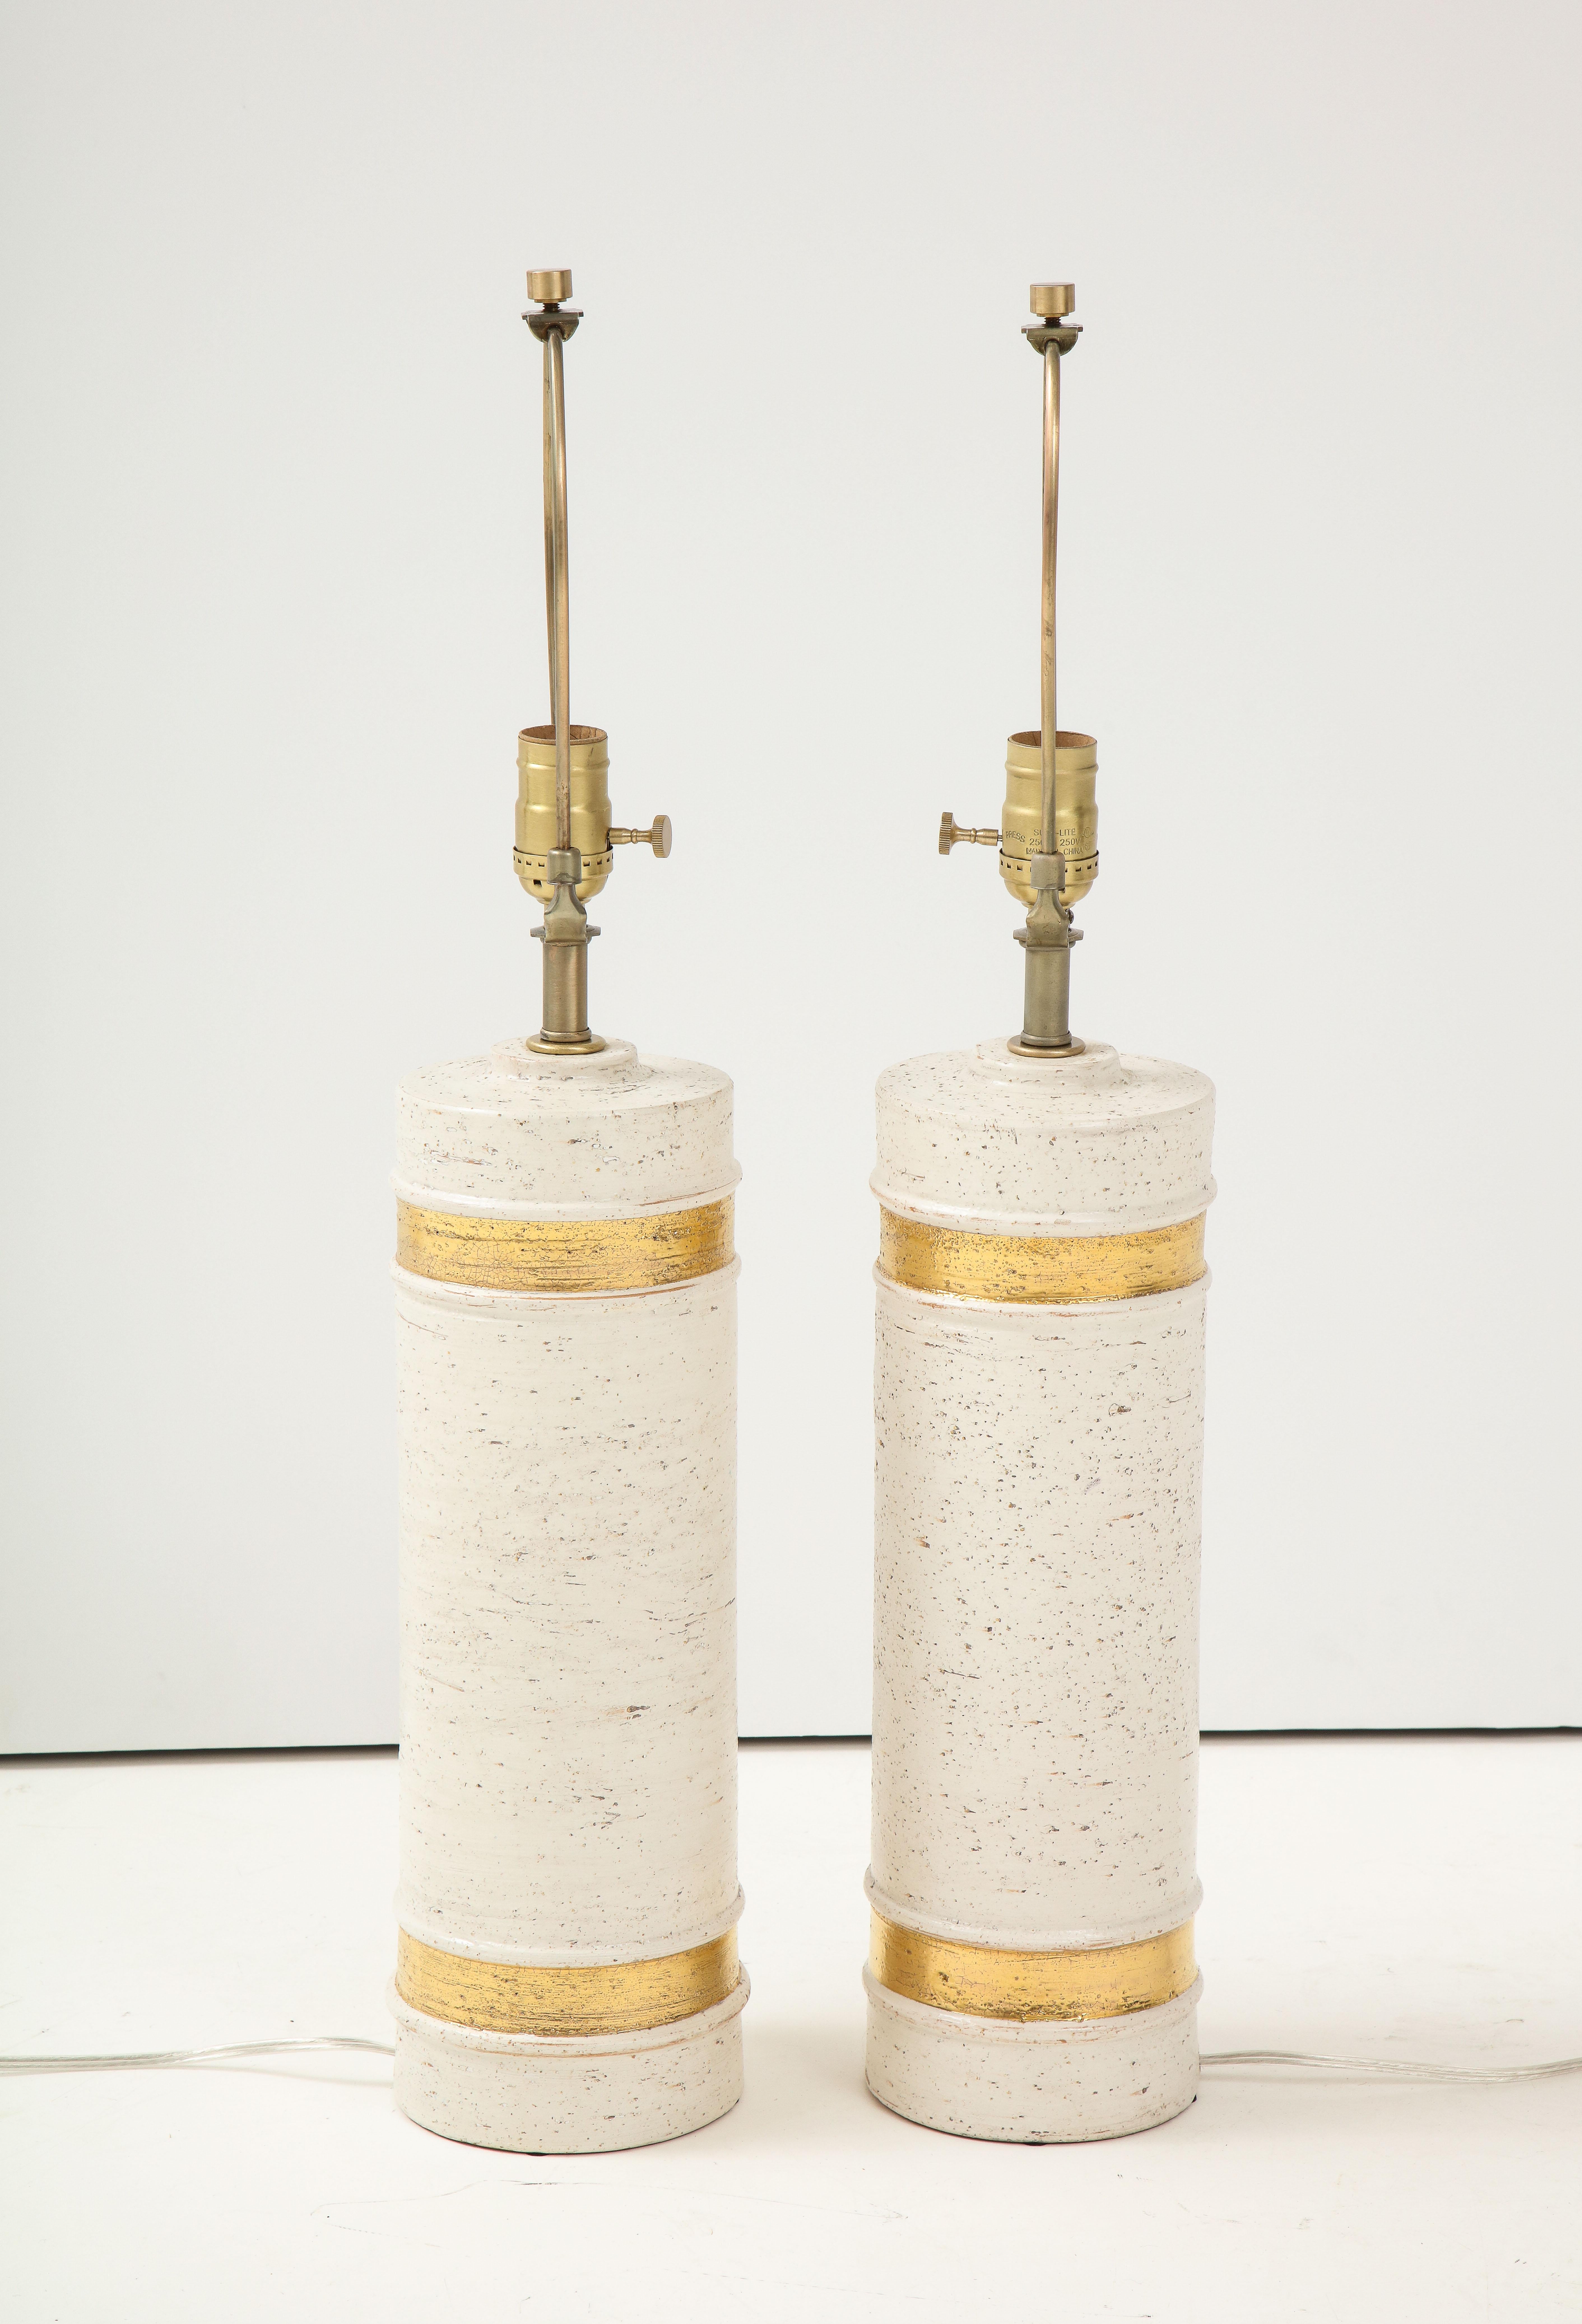 Pair of Scandinavian Modern birch tree glazed lamps with 22kt gold glaze bands, rewired for use in the USA.
100W max.